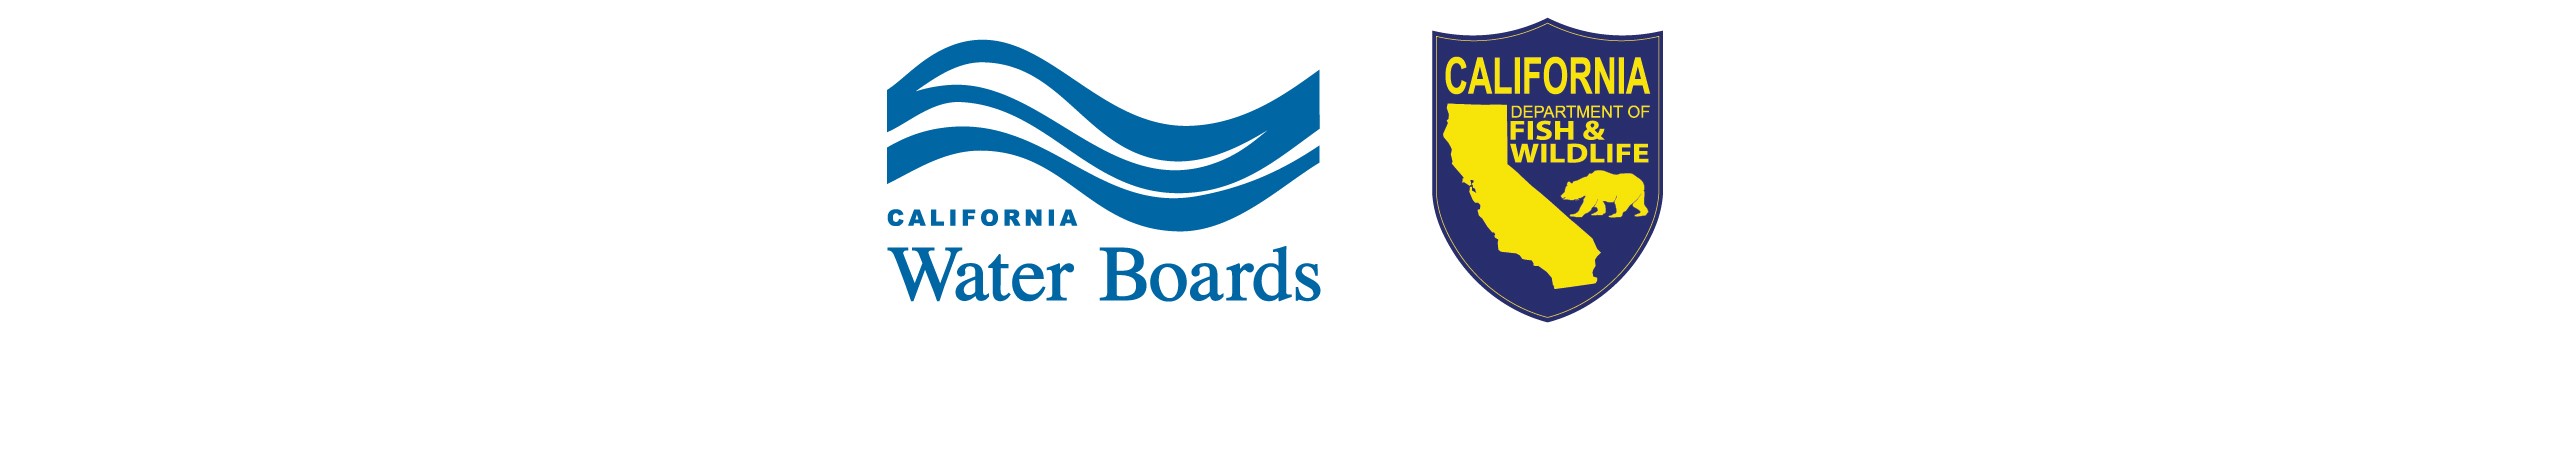 CDFW and State Water Board logos